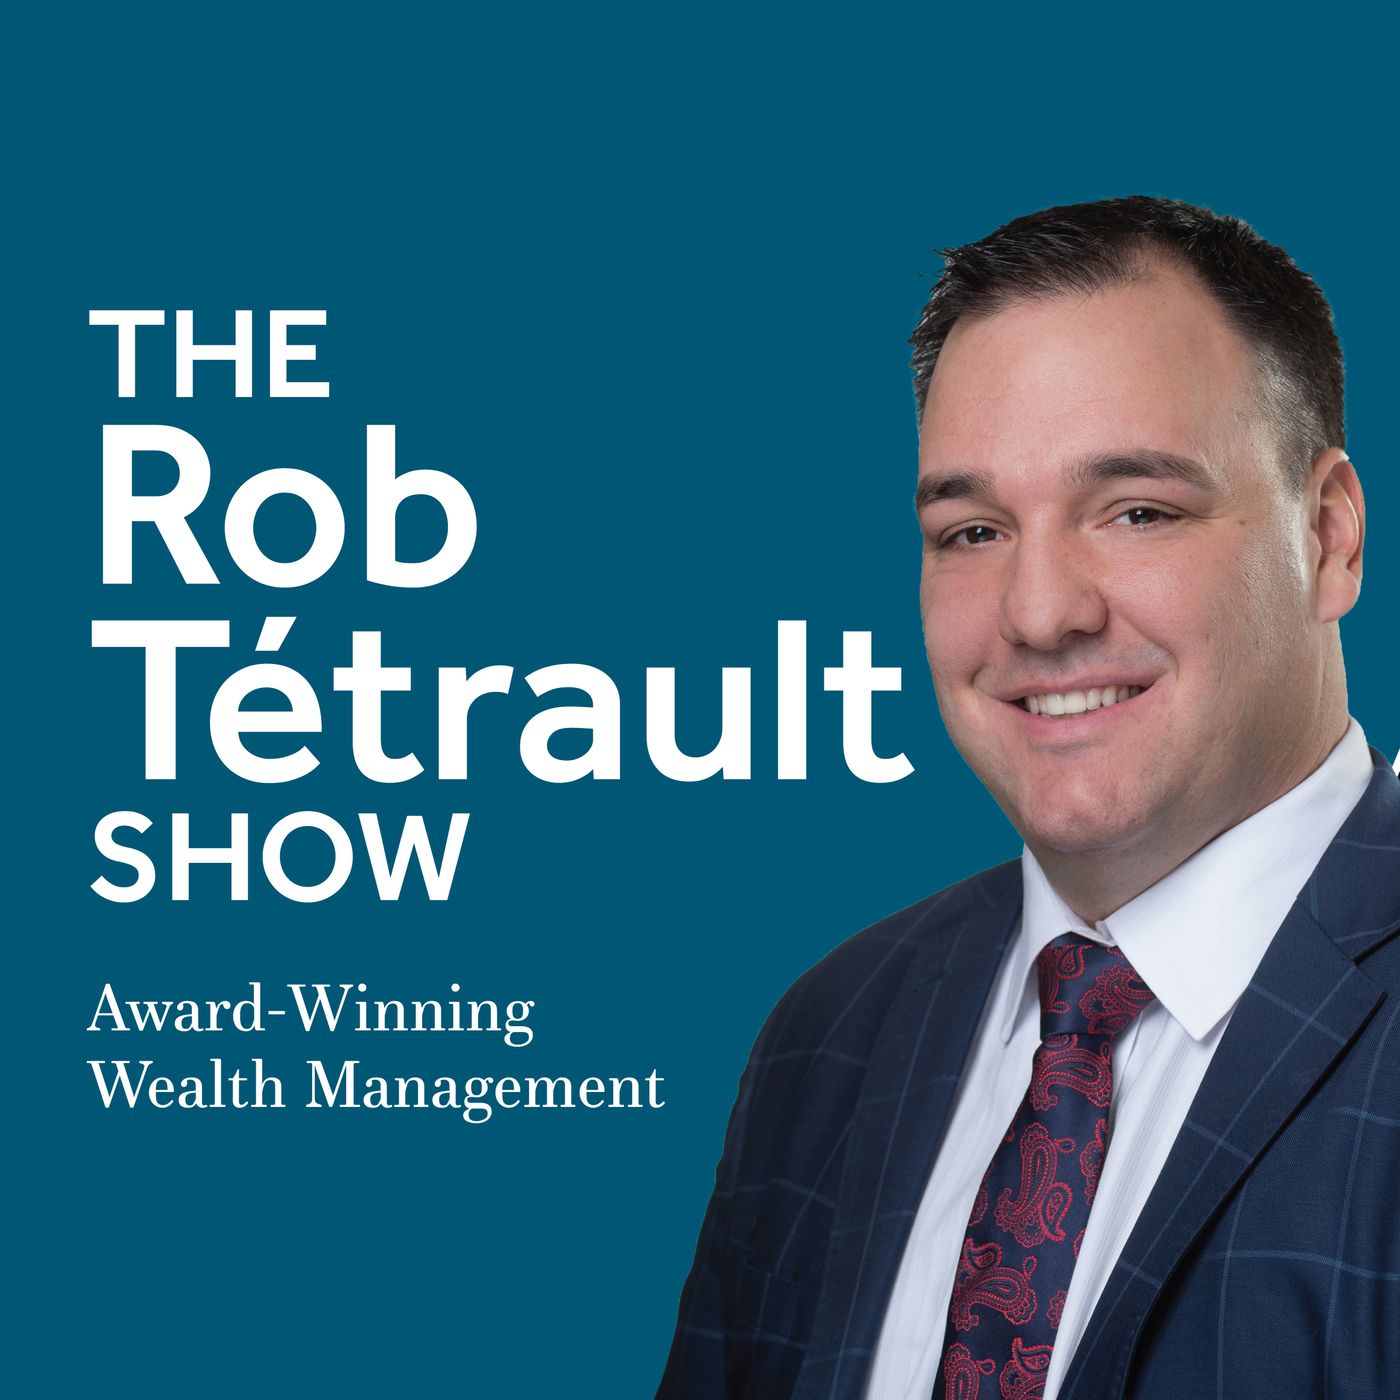 The Rob Tetrault Show